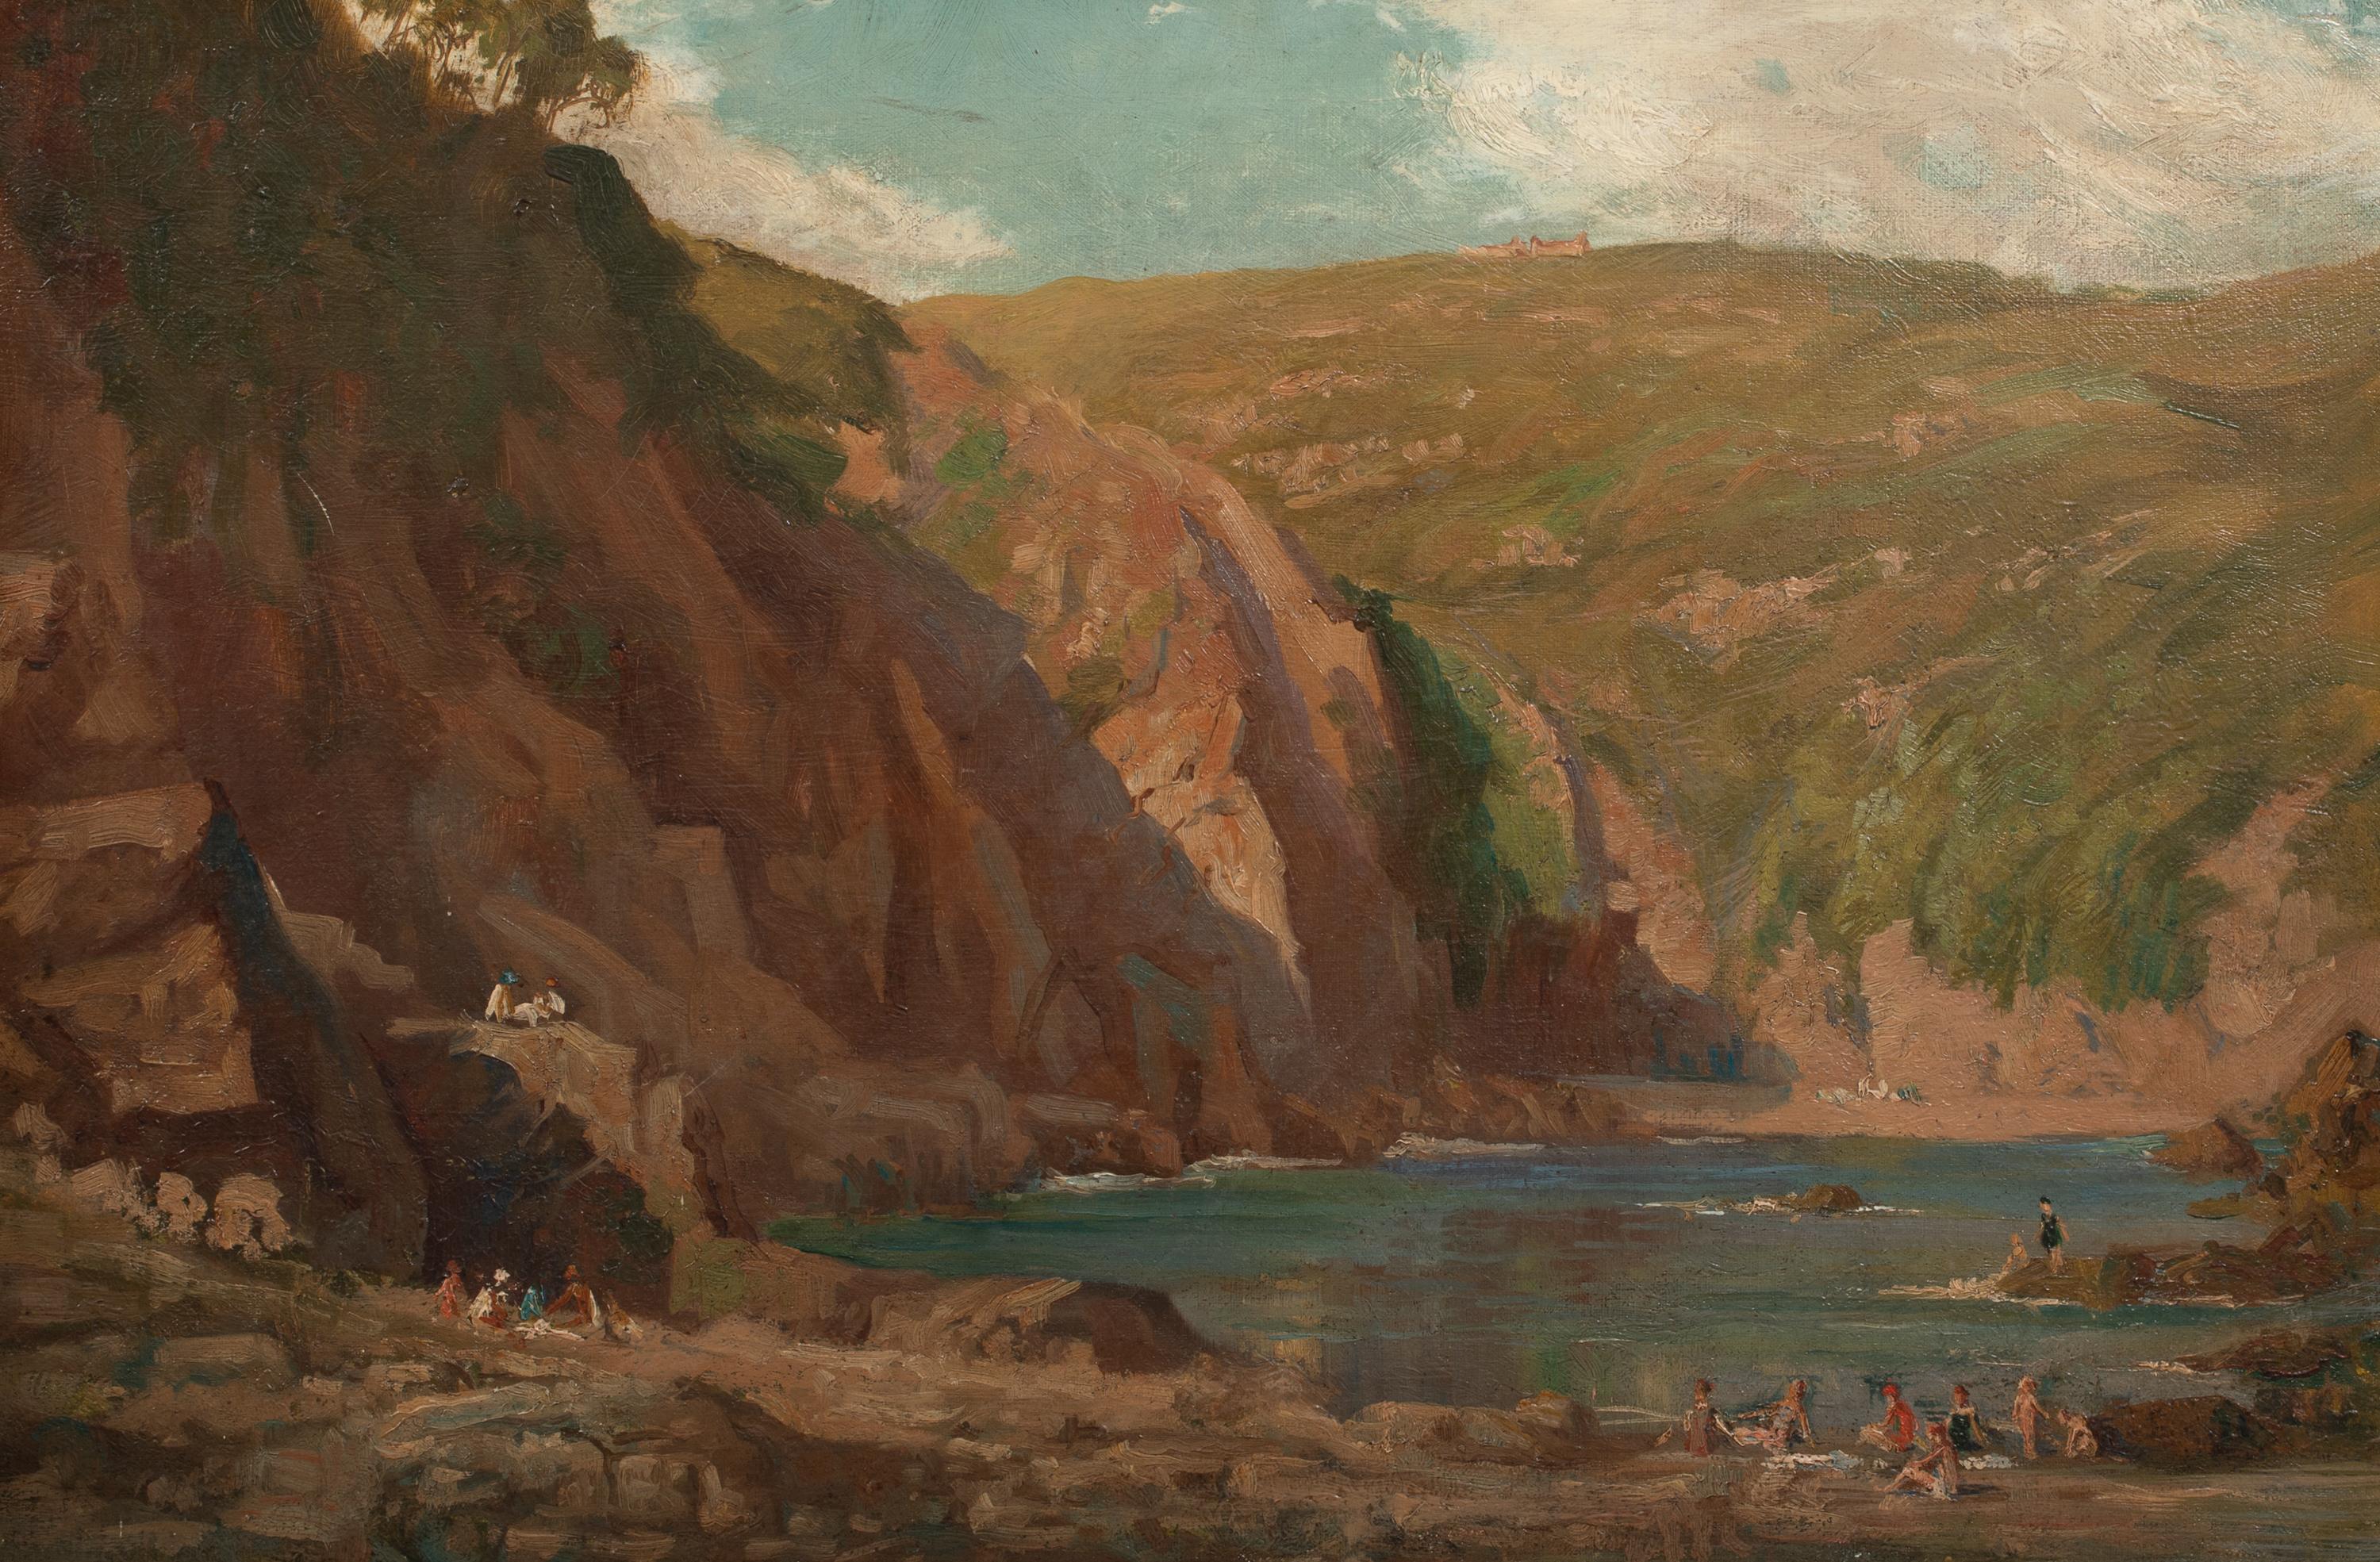 Bathers At Lulworth Cove, Dorset, 19th Century

Samuel John Lamorna BIRCH (1869-1955)

Large circa 1900 extensive view at Lulworth Cove, Dorset, oil on canvas by Samuel John Lamorna Birch. Excellent quality and condition view of bathers in summer at